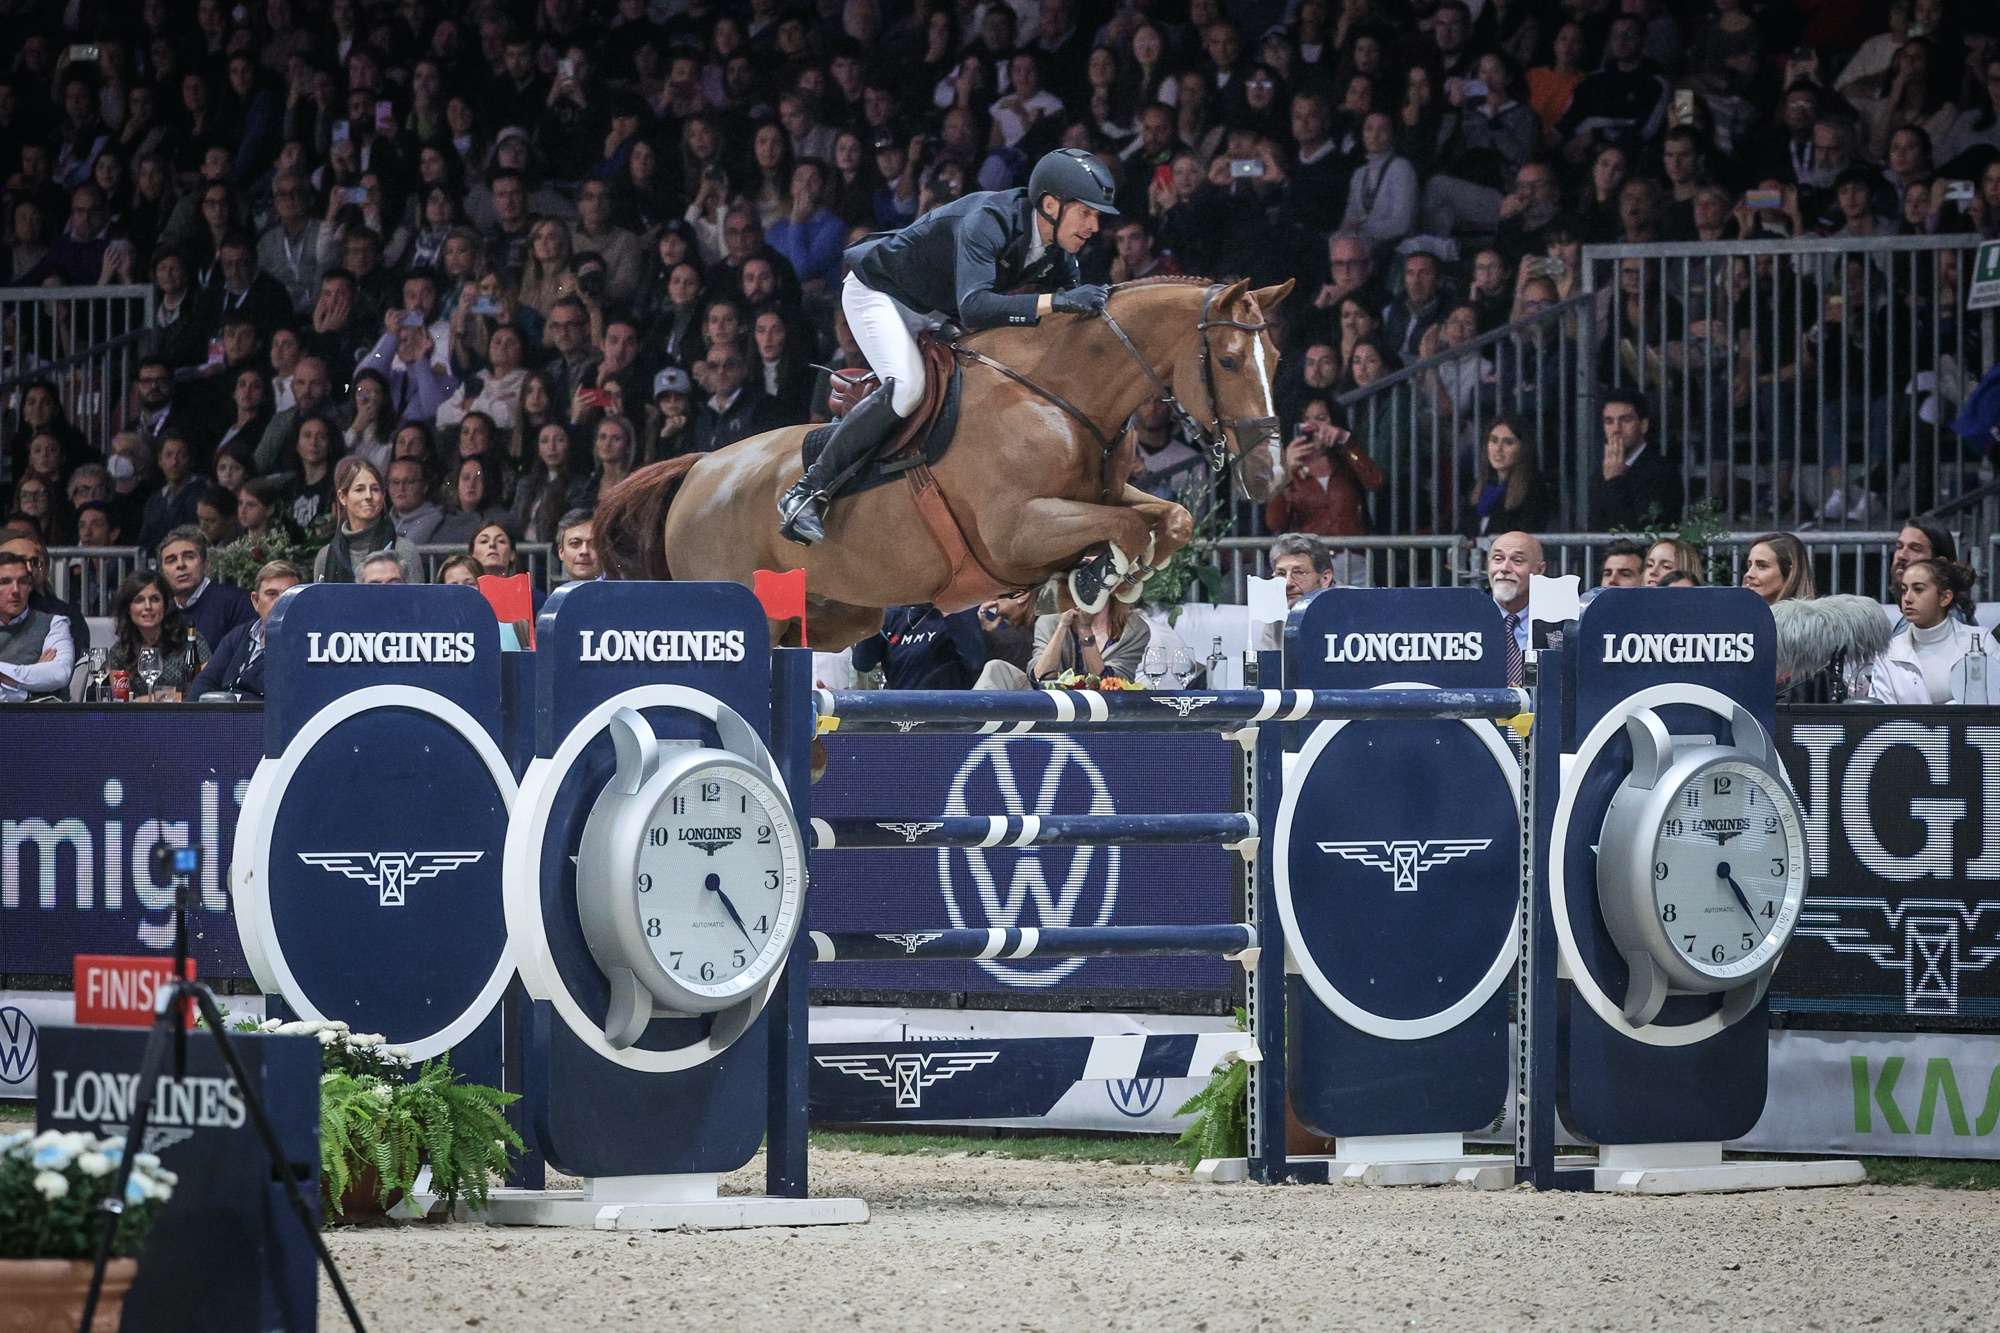 World number one and reigning world champions, Sweden’s Henrik von Eckermann and his super-steed King Edward, won today’s fourth leg of the Longines FEI Jumping World Cup™ 2022/2023 Western European League at Verona, Italy. (FEI/Massimo Argenziano)